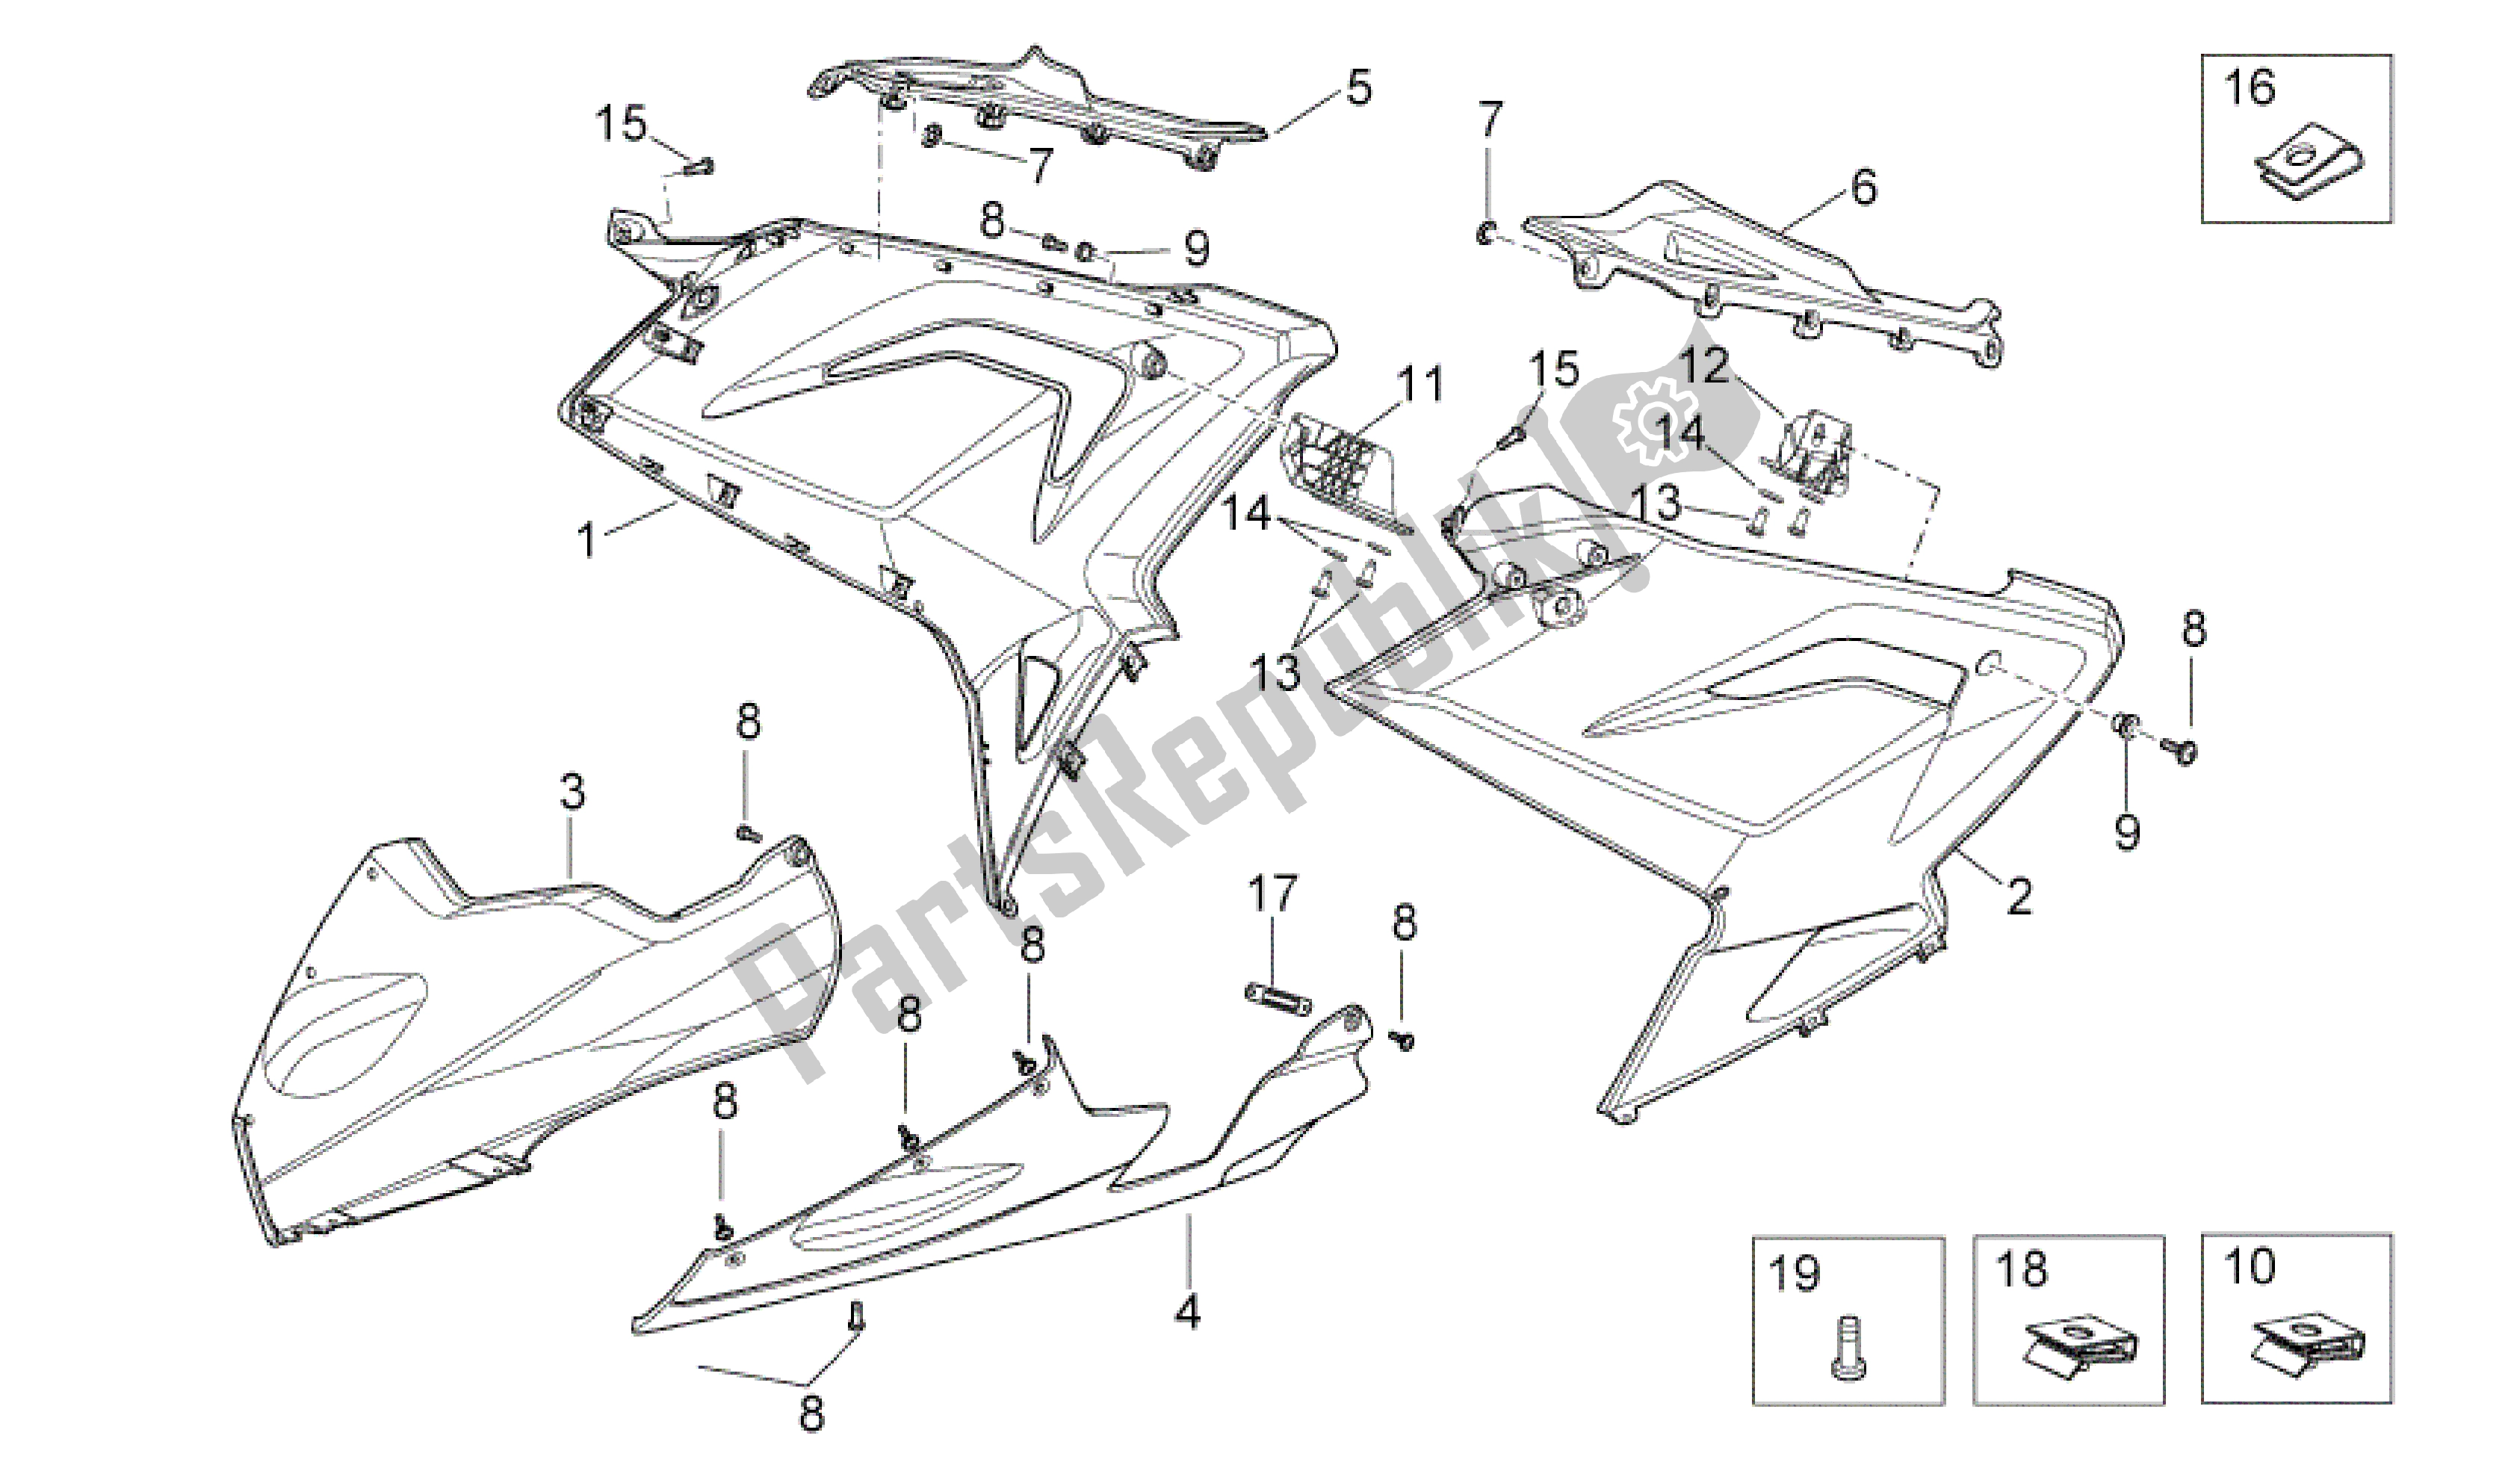 All parts for the Central Body of the Aprilia RS 50 2006 - 2010